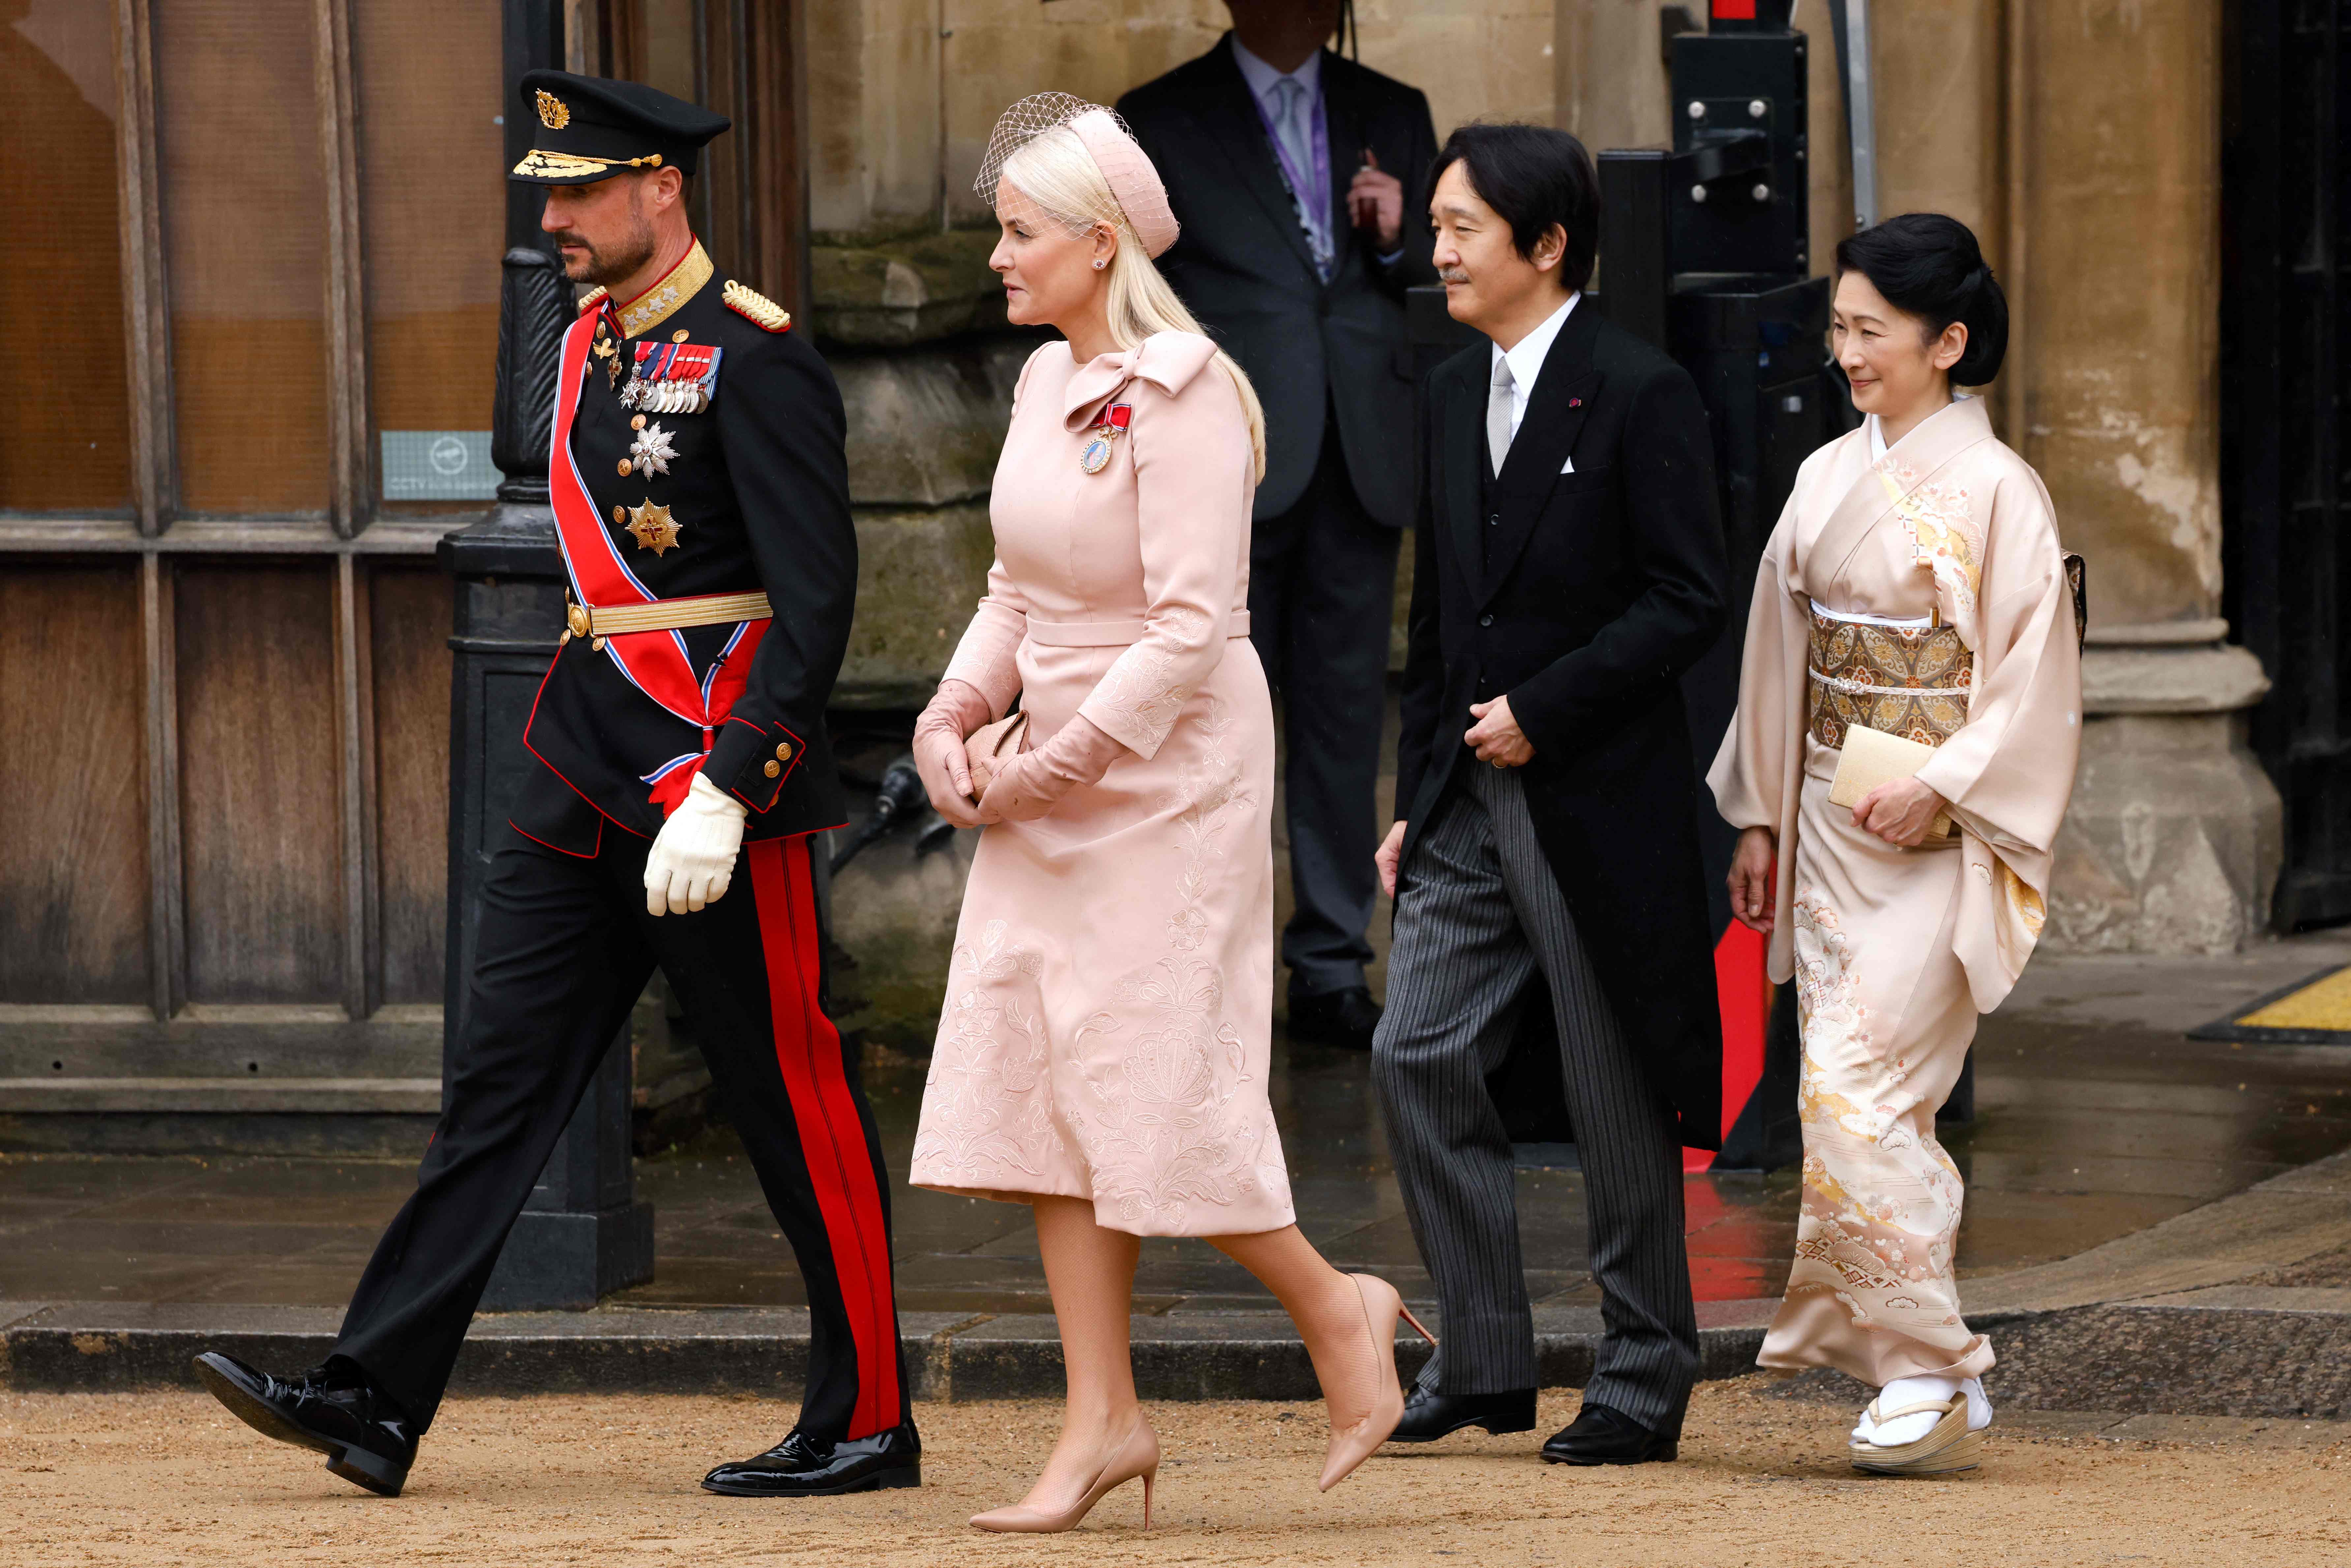 Norway's Crown Prince Haakon (front left) with his wife Mette-Mariet (second from left) while on the right Japan's Prince Fumihito and Princess Keiko attend the ceremony.